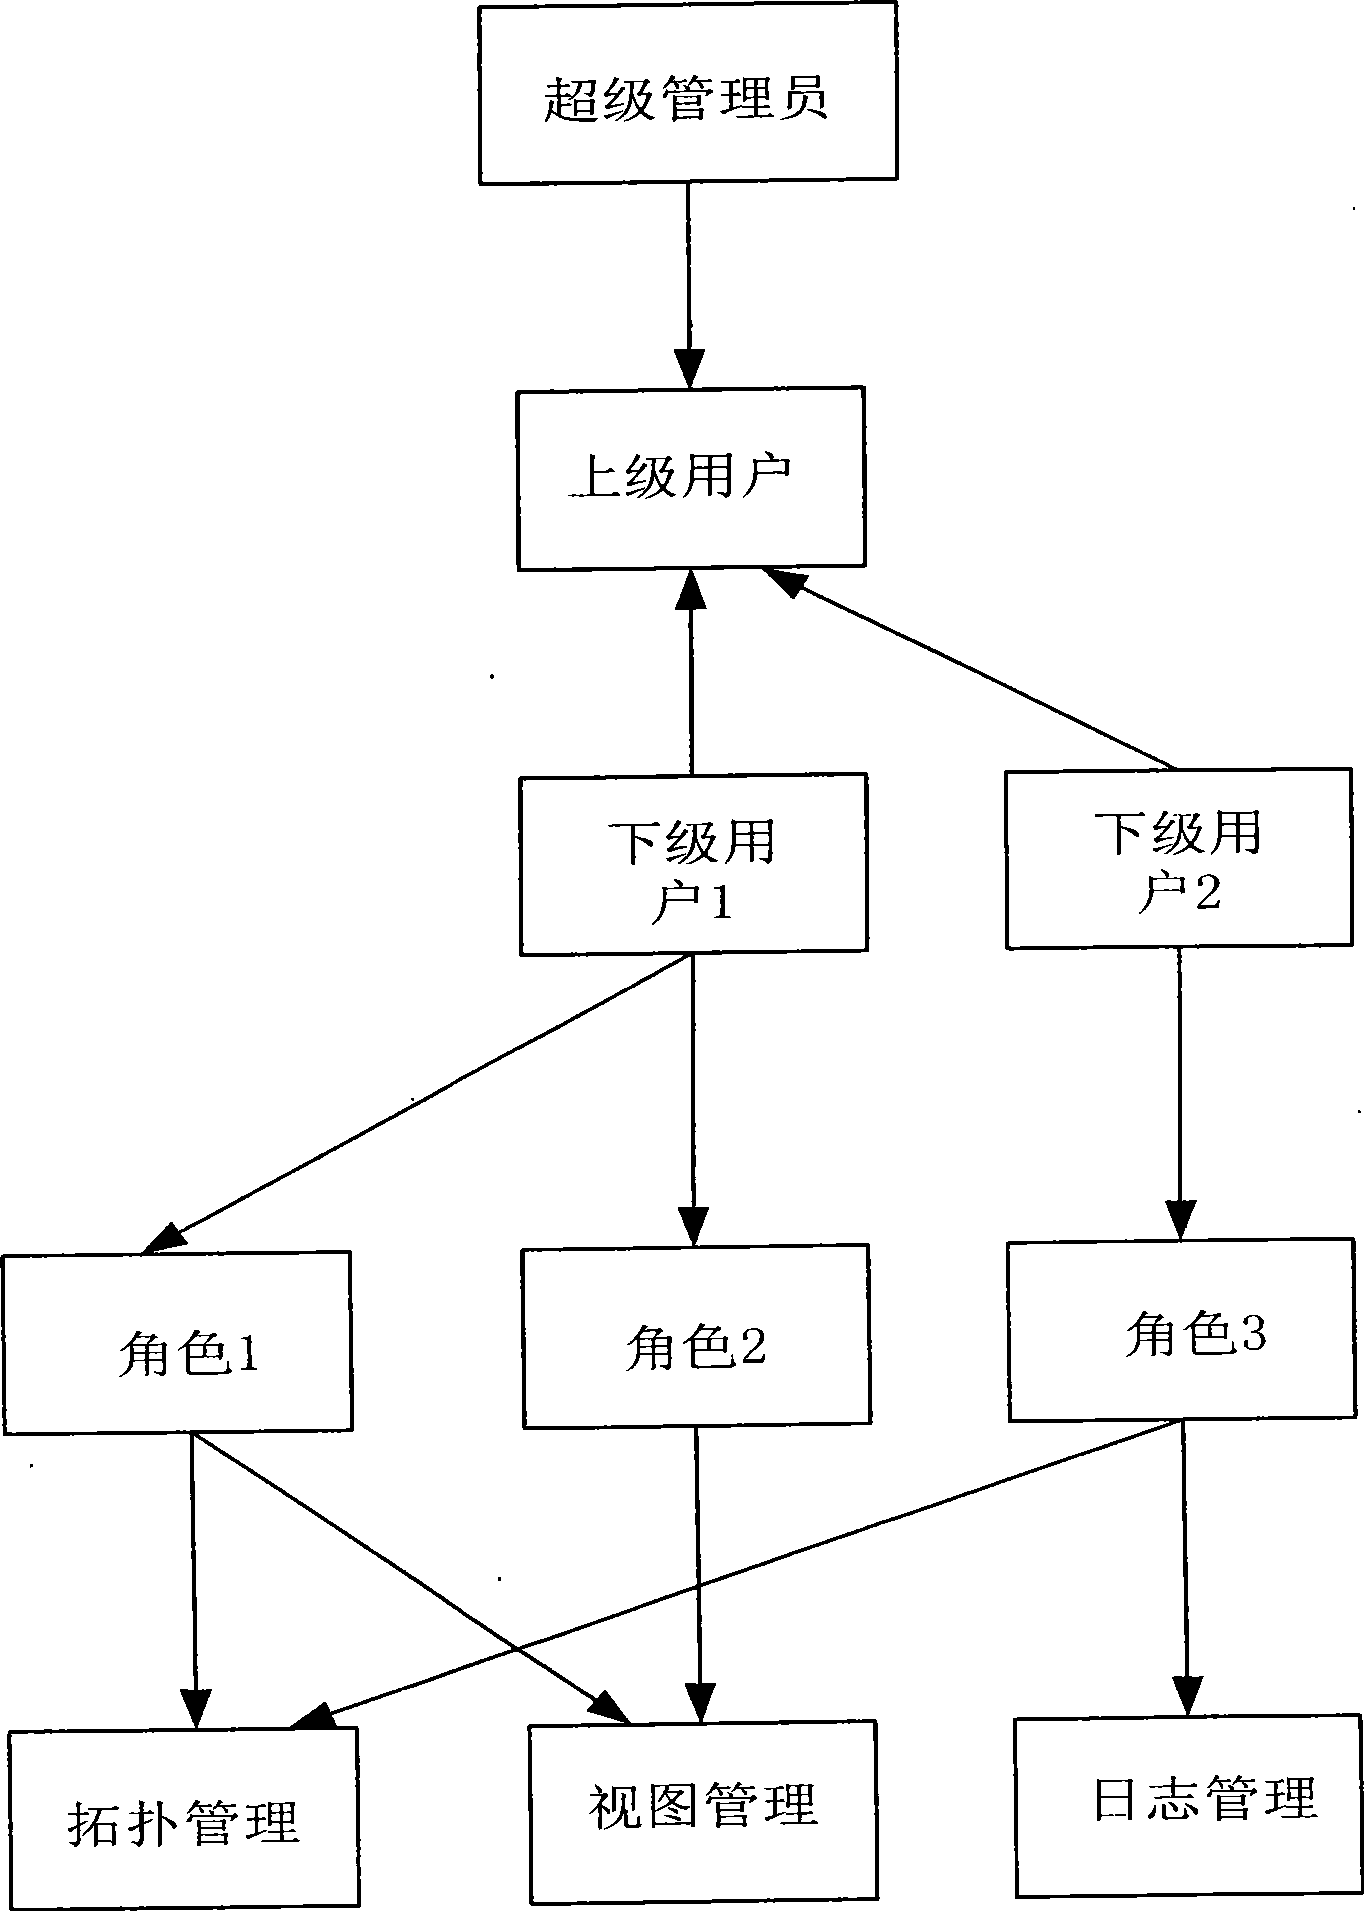 Method for obtaining user authority of network management system